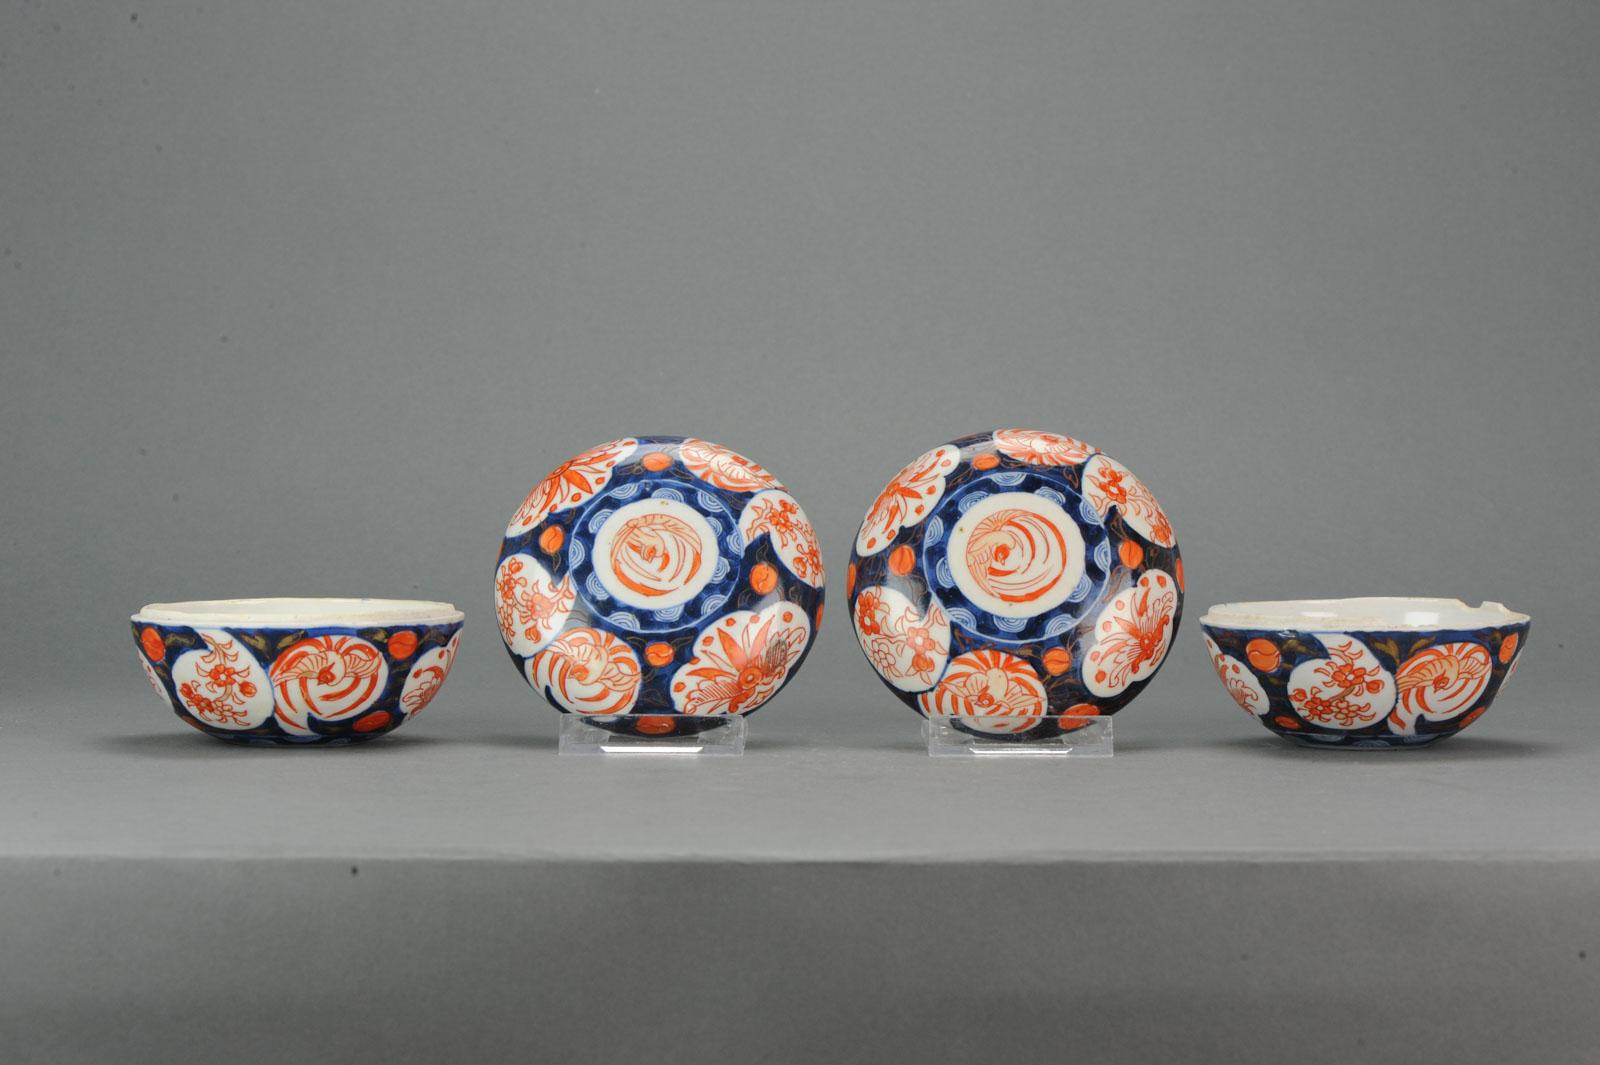 Lovely and good condition Lidded bowls/pots in imari colors.

Additional information:
Material: Porcelain & Pottery
Type: Vases
Region of Origin: Japan
Period: 17th century, 18th century Edo Period (1603–1867)
Age: 19th